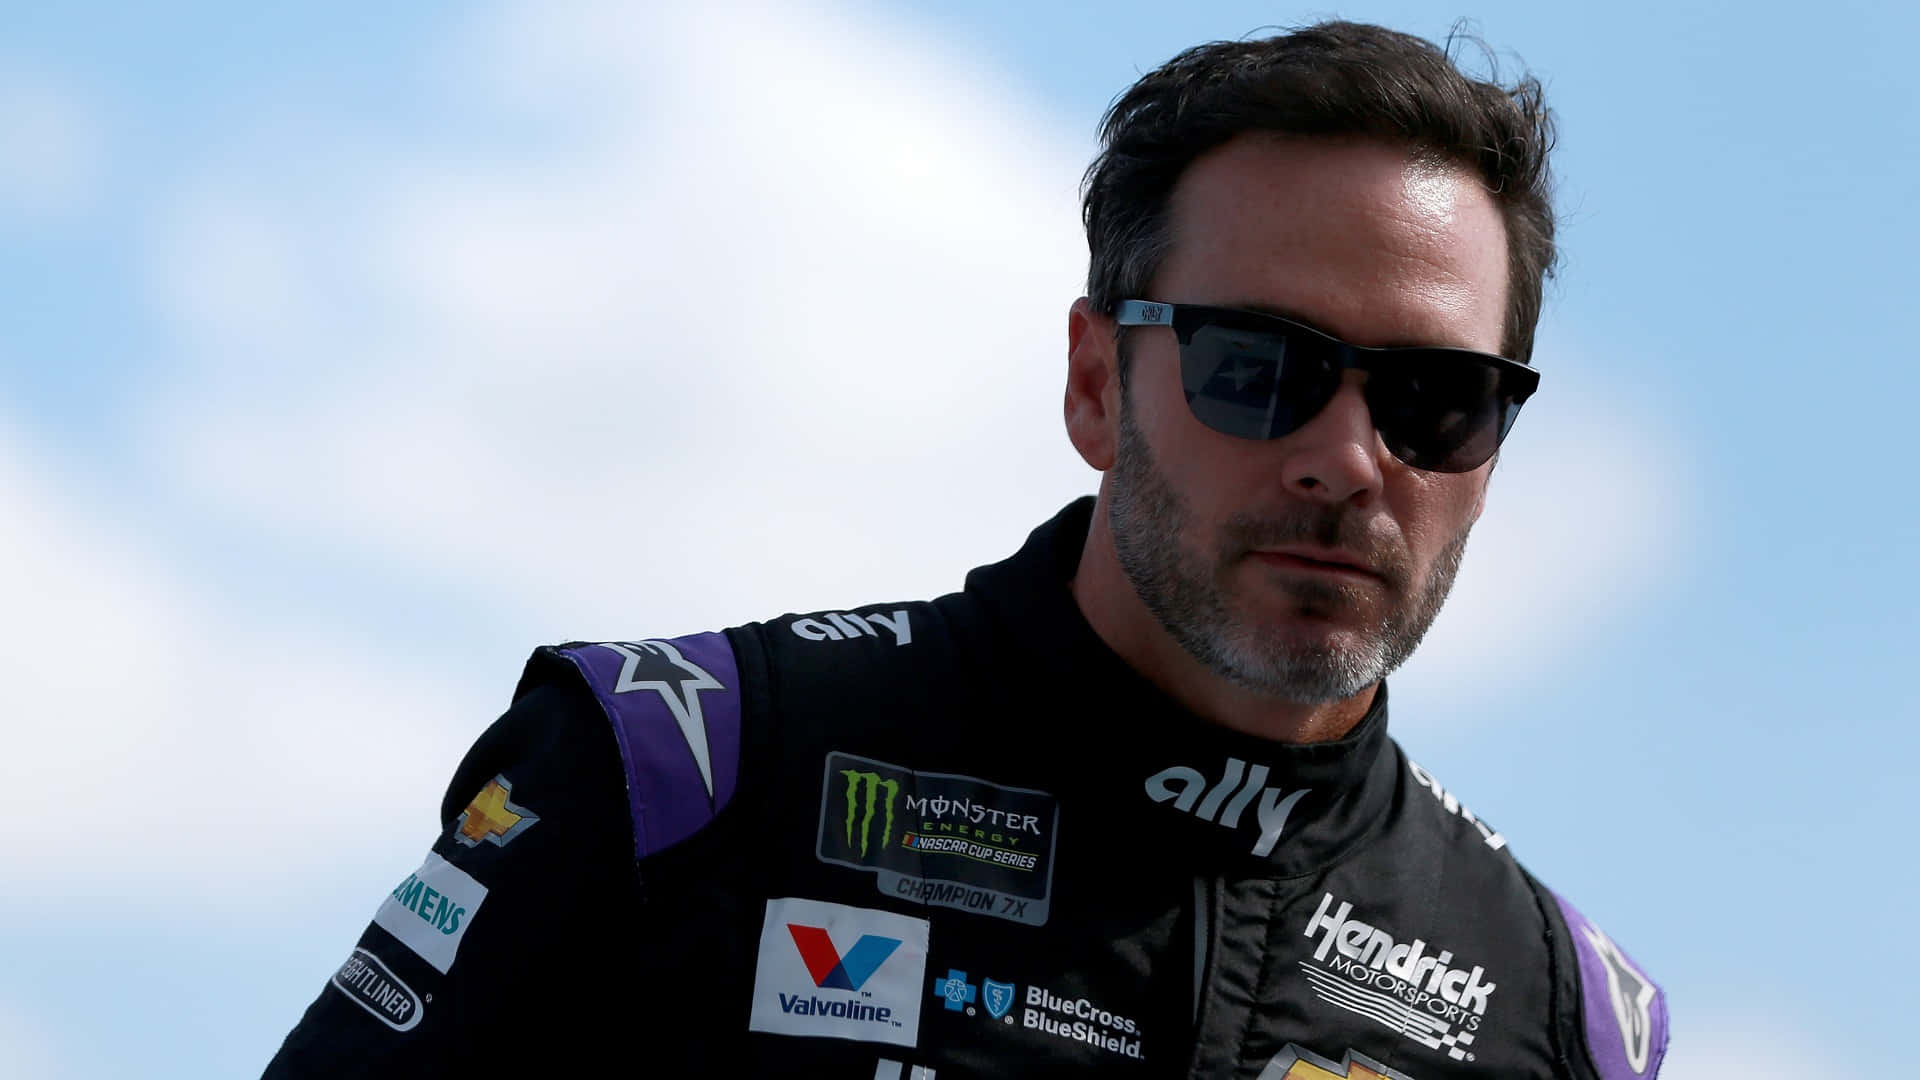 Jimmie Johnson in his racing gear with his car on the track Wallpaper